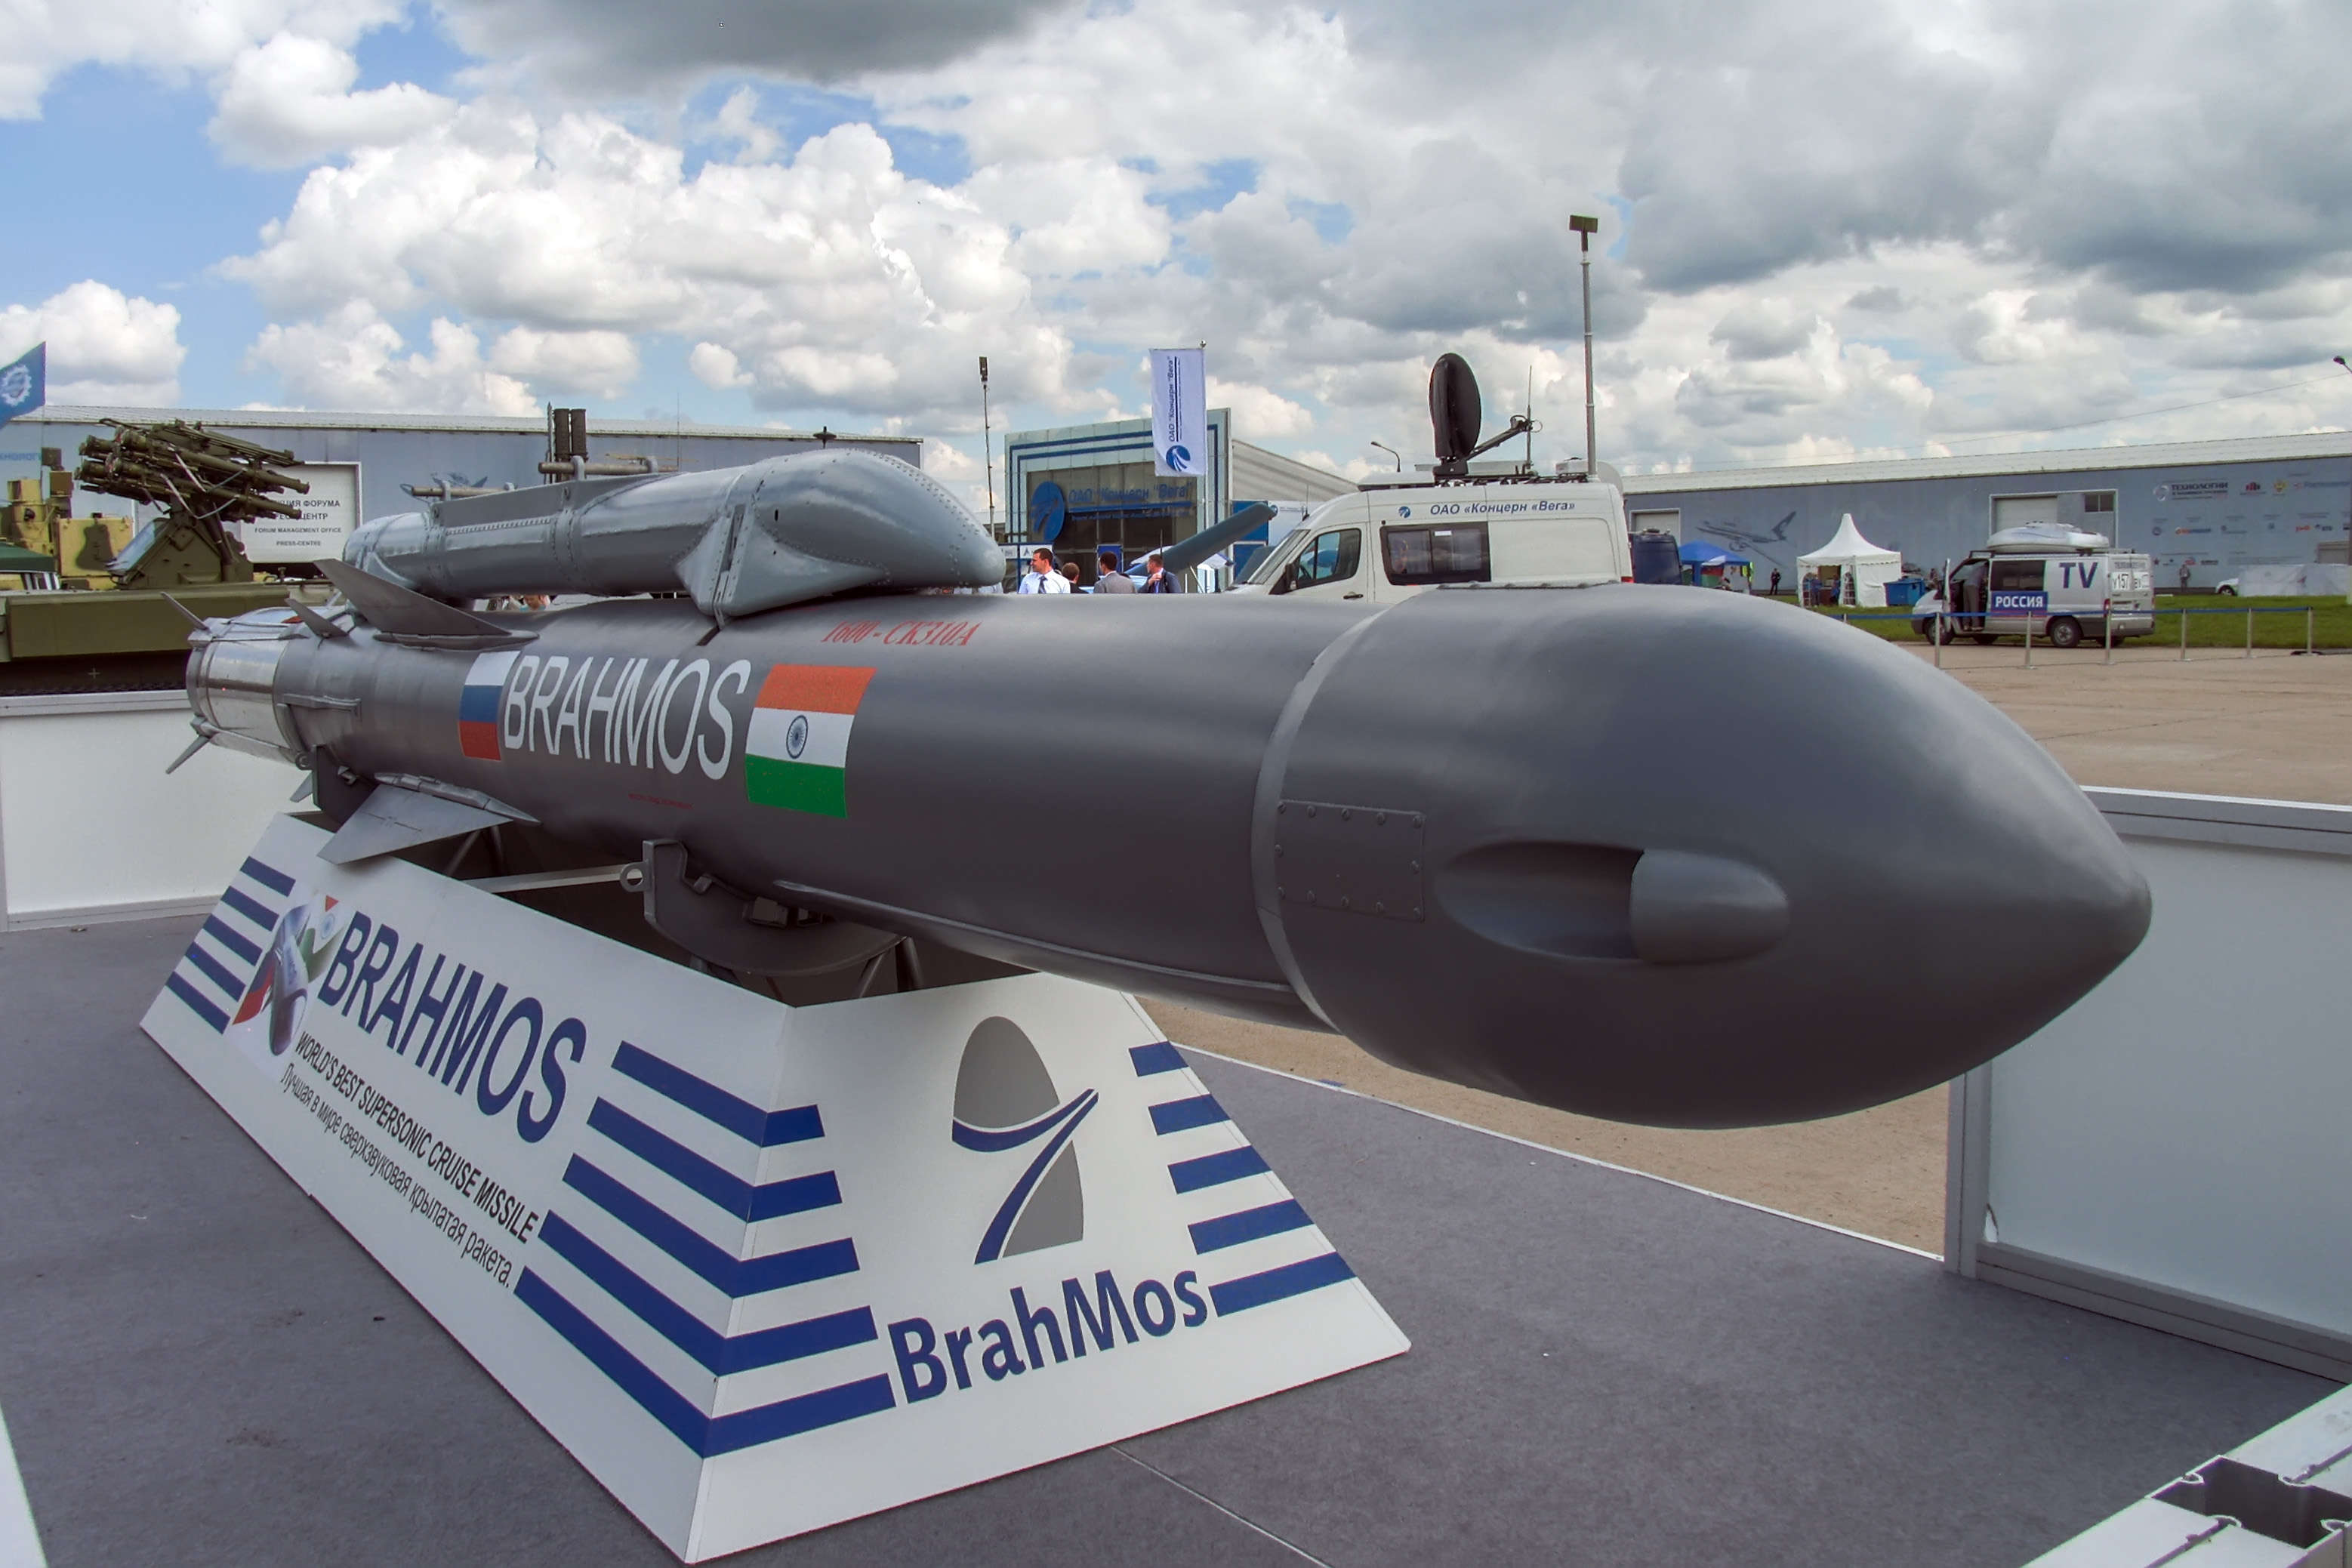 cruise missile example in india